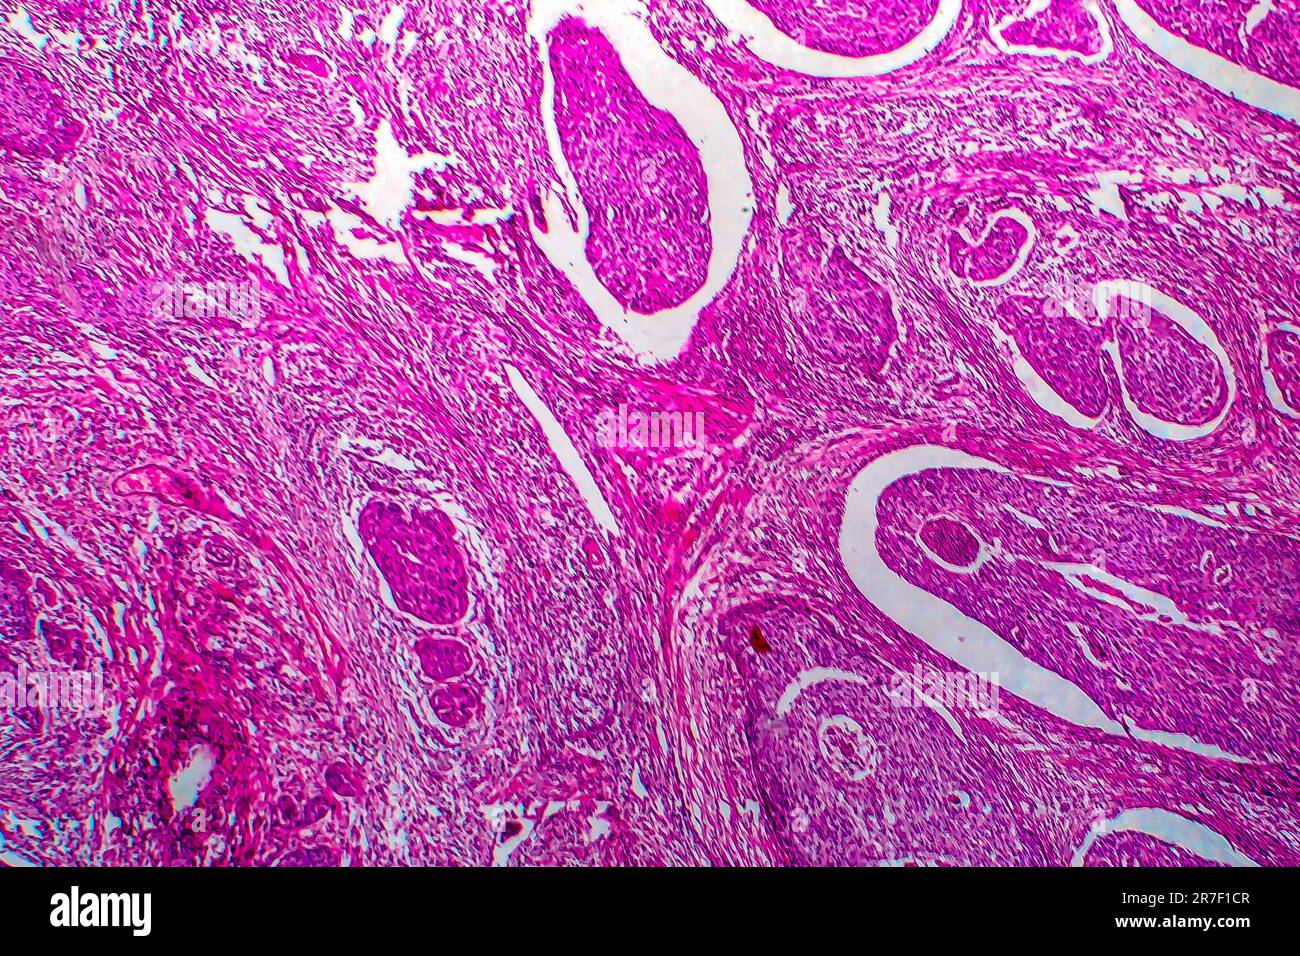 Cervical cancer. Light micrograph (LM) of a section through a squamous cell carcinoma of the cervix. Cervical cancer is a malignancy of the cervix, wh Stock Photo